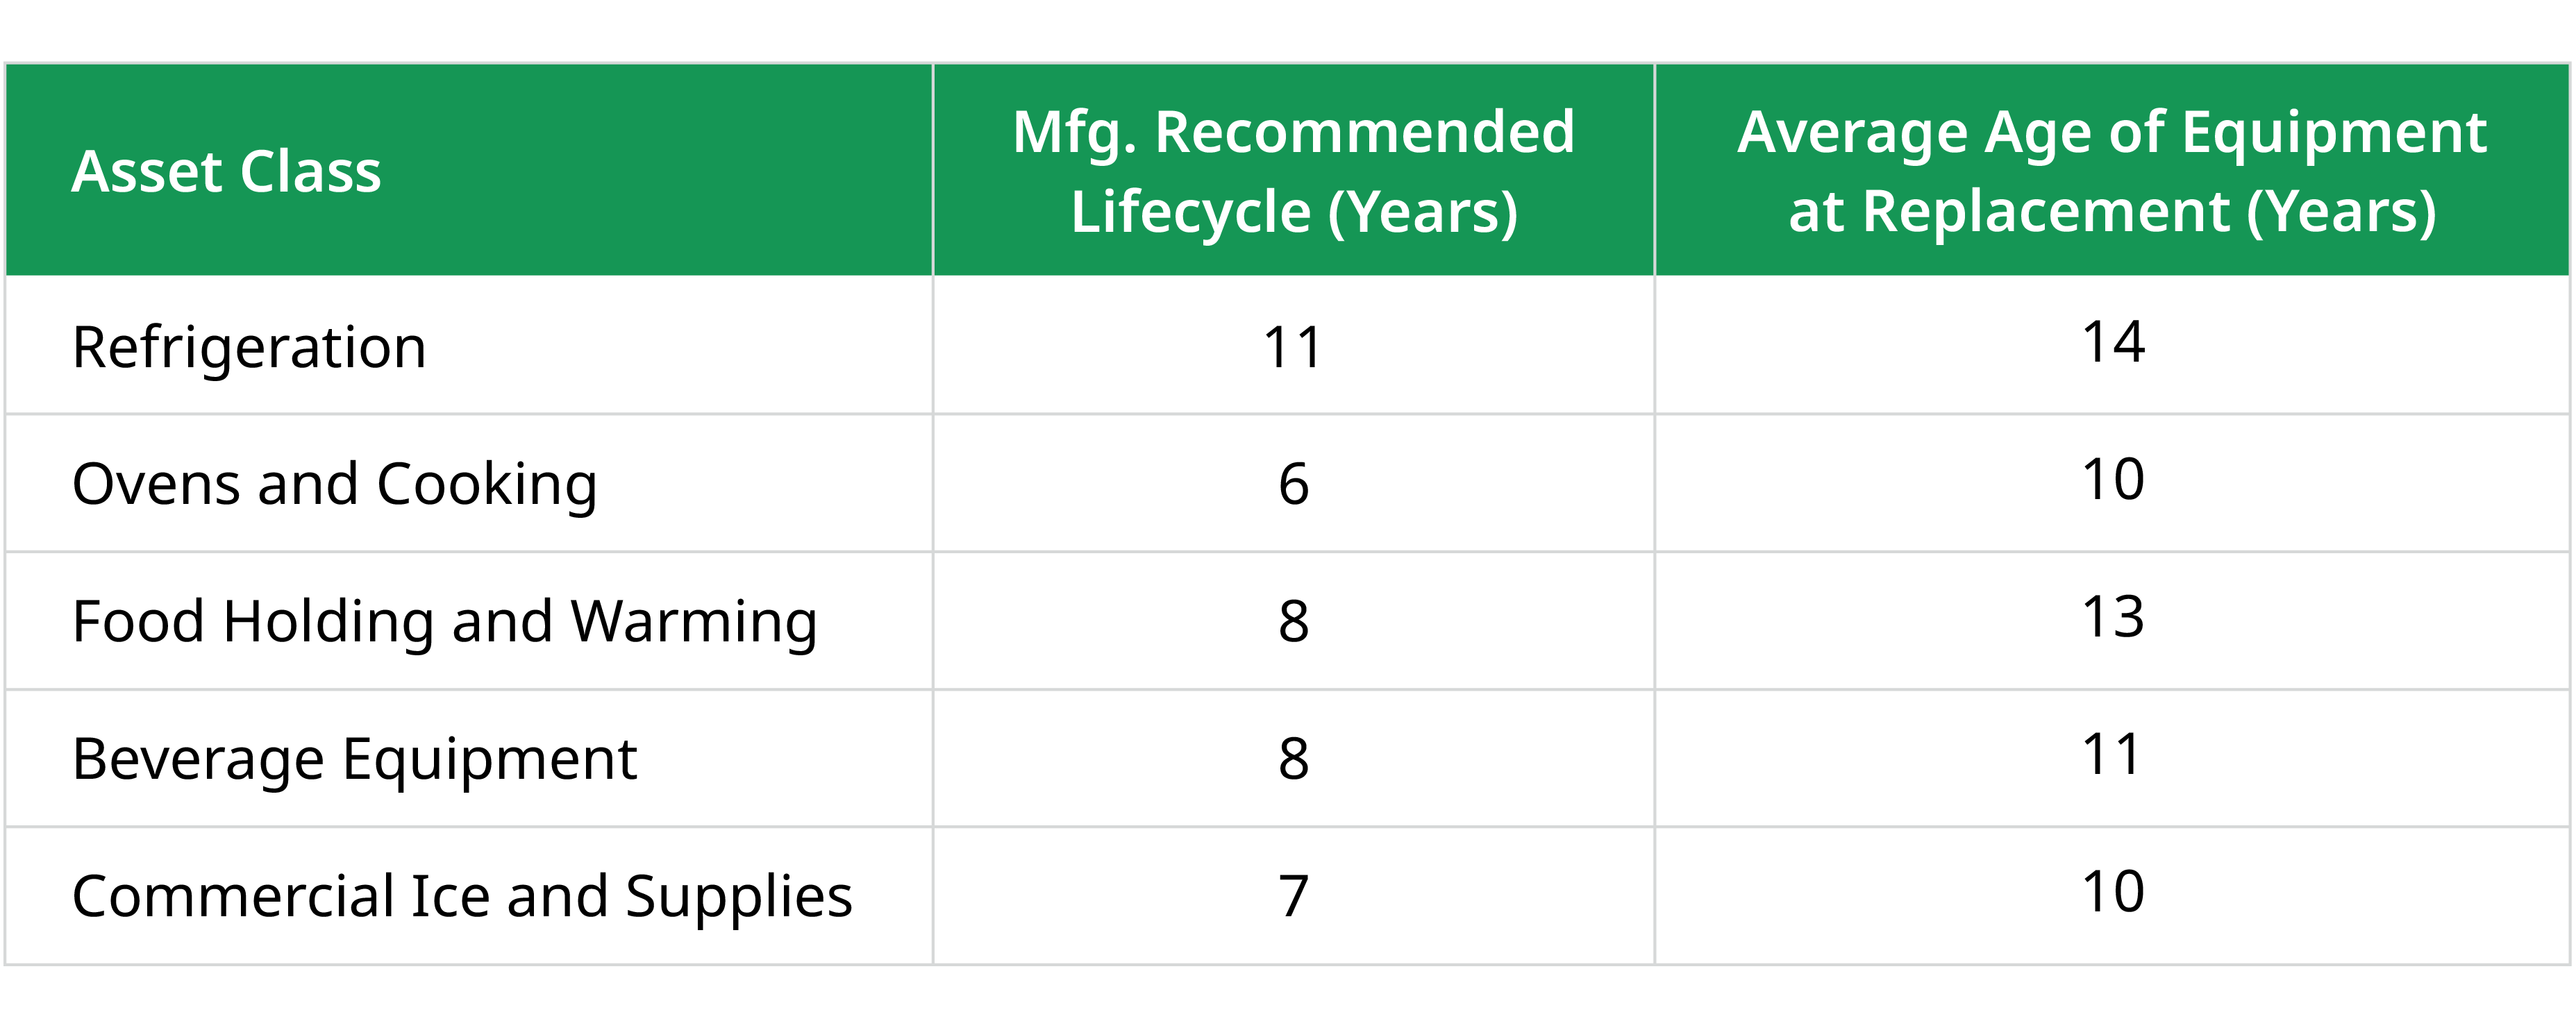 Average Age of Equipment at Replacement (Years) vs. Mfg. Recommended Lifecycle (Years)